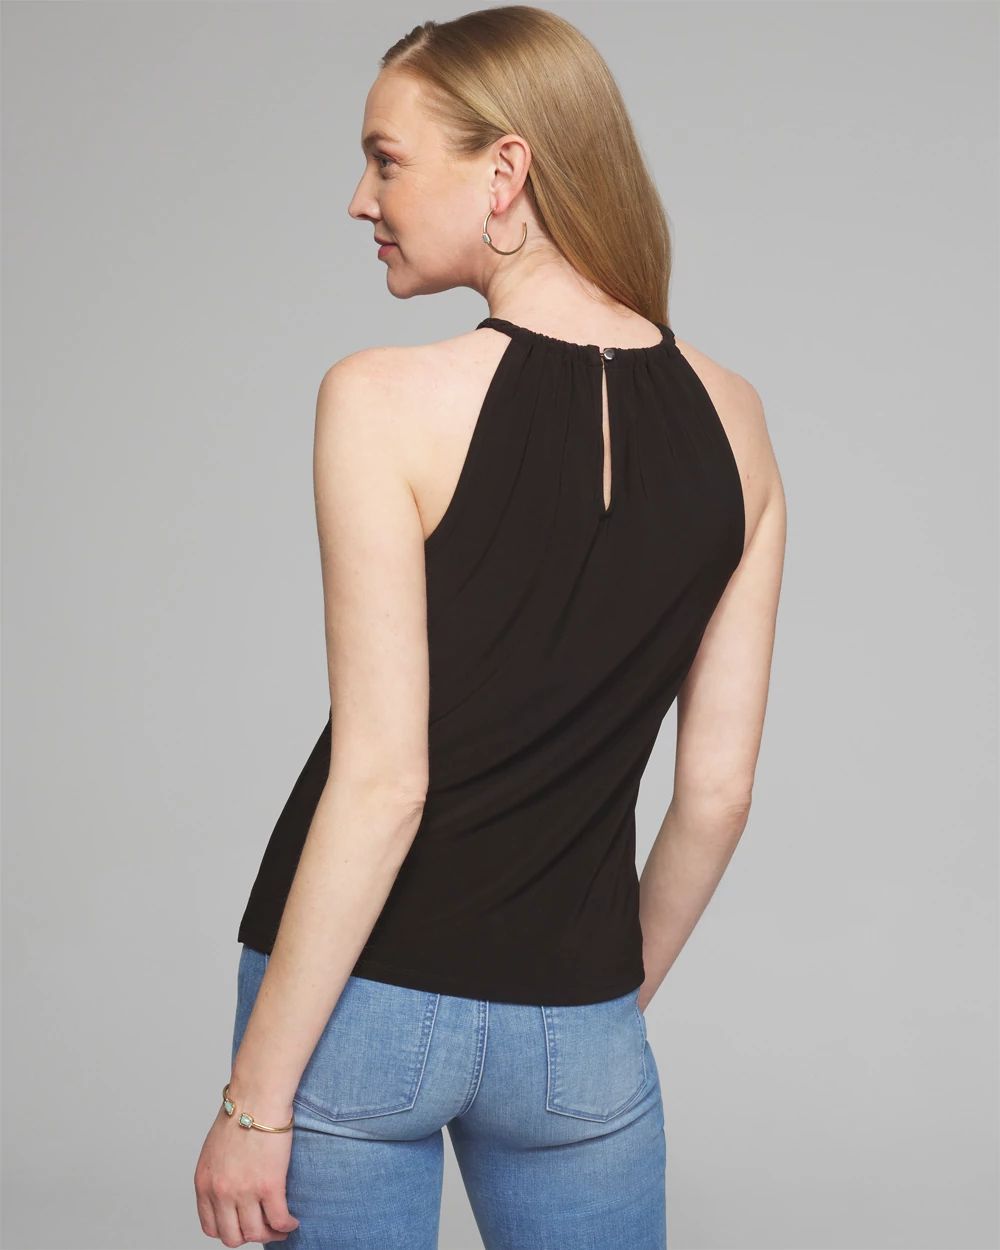 Outlet WHBM Braided Trim Halter Top